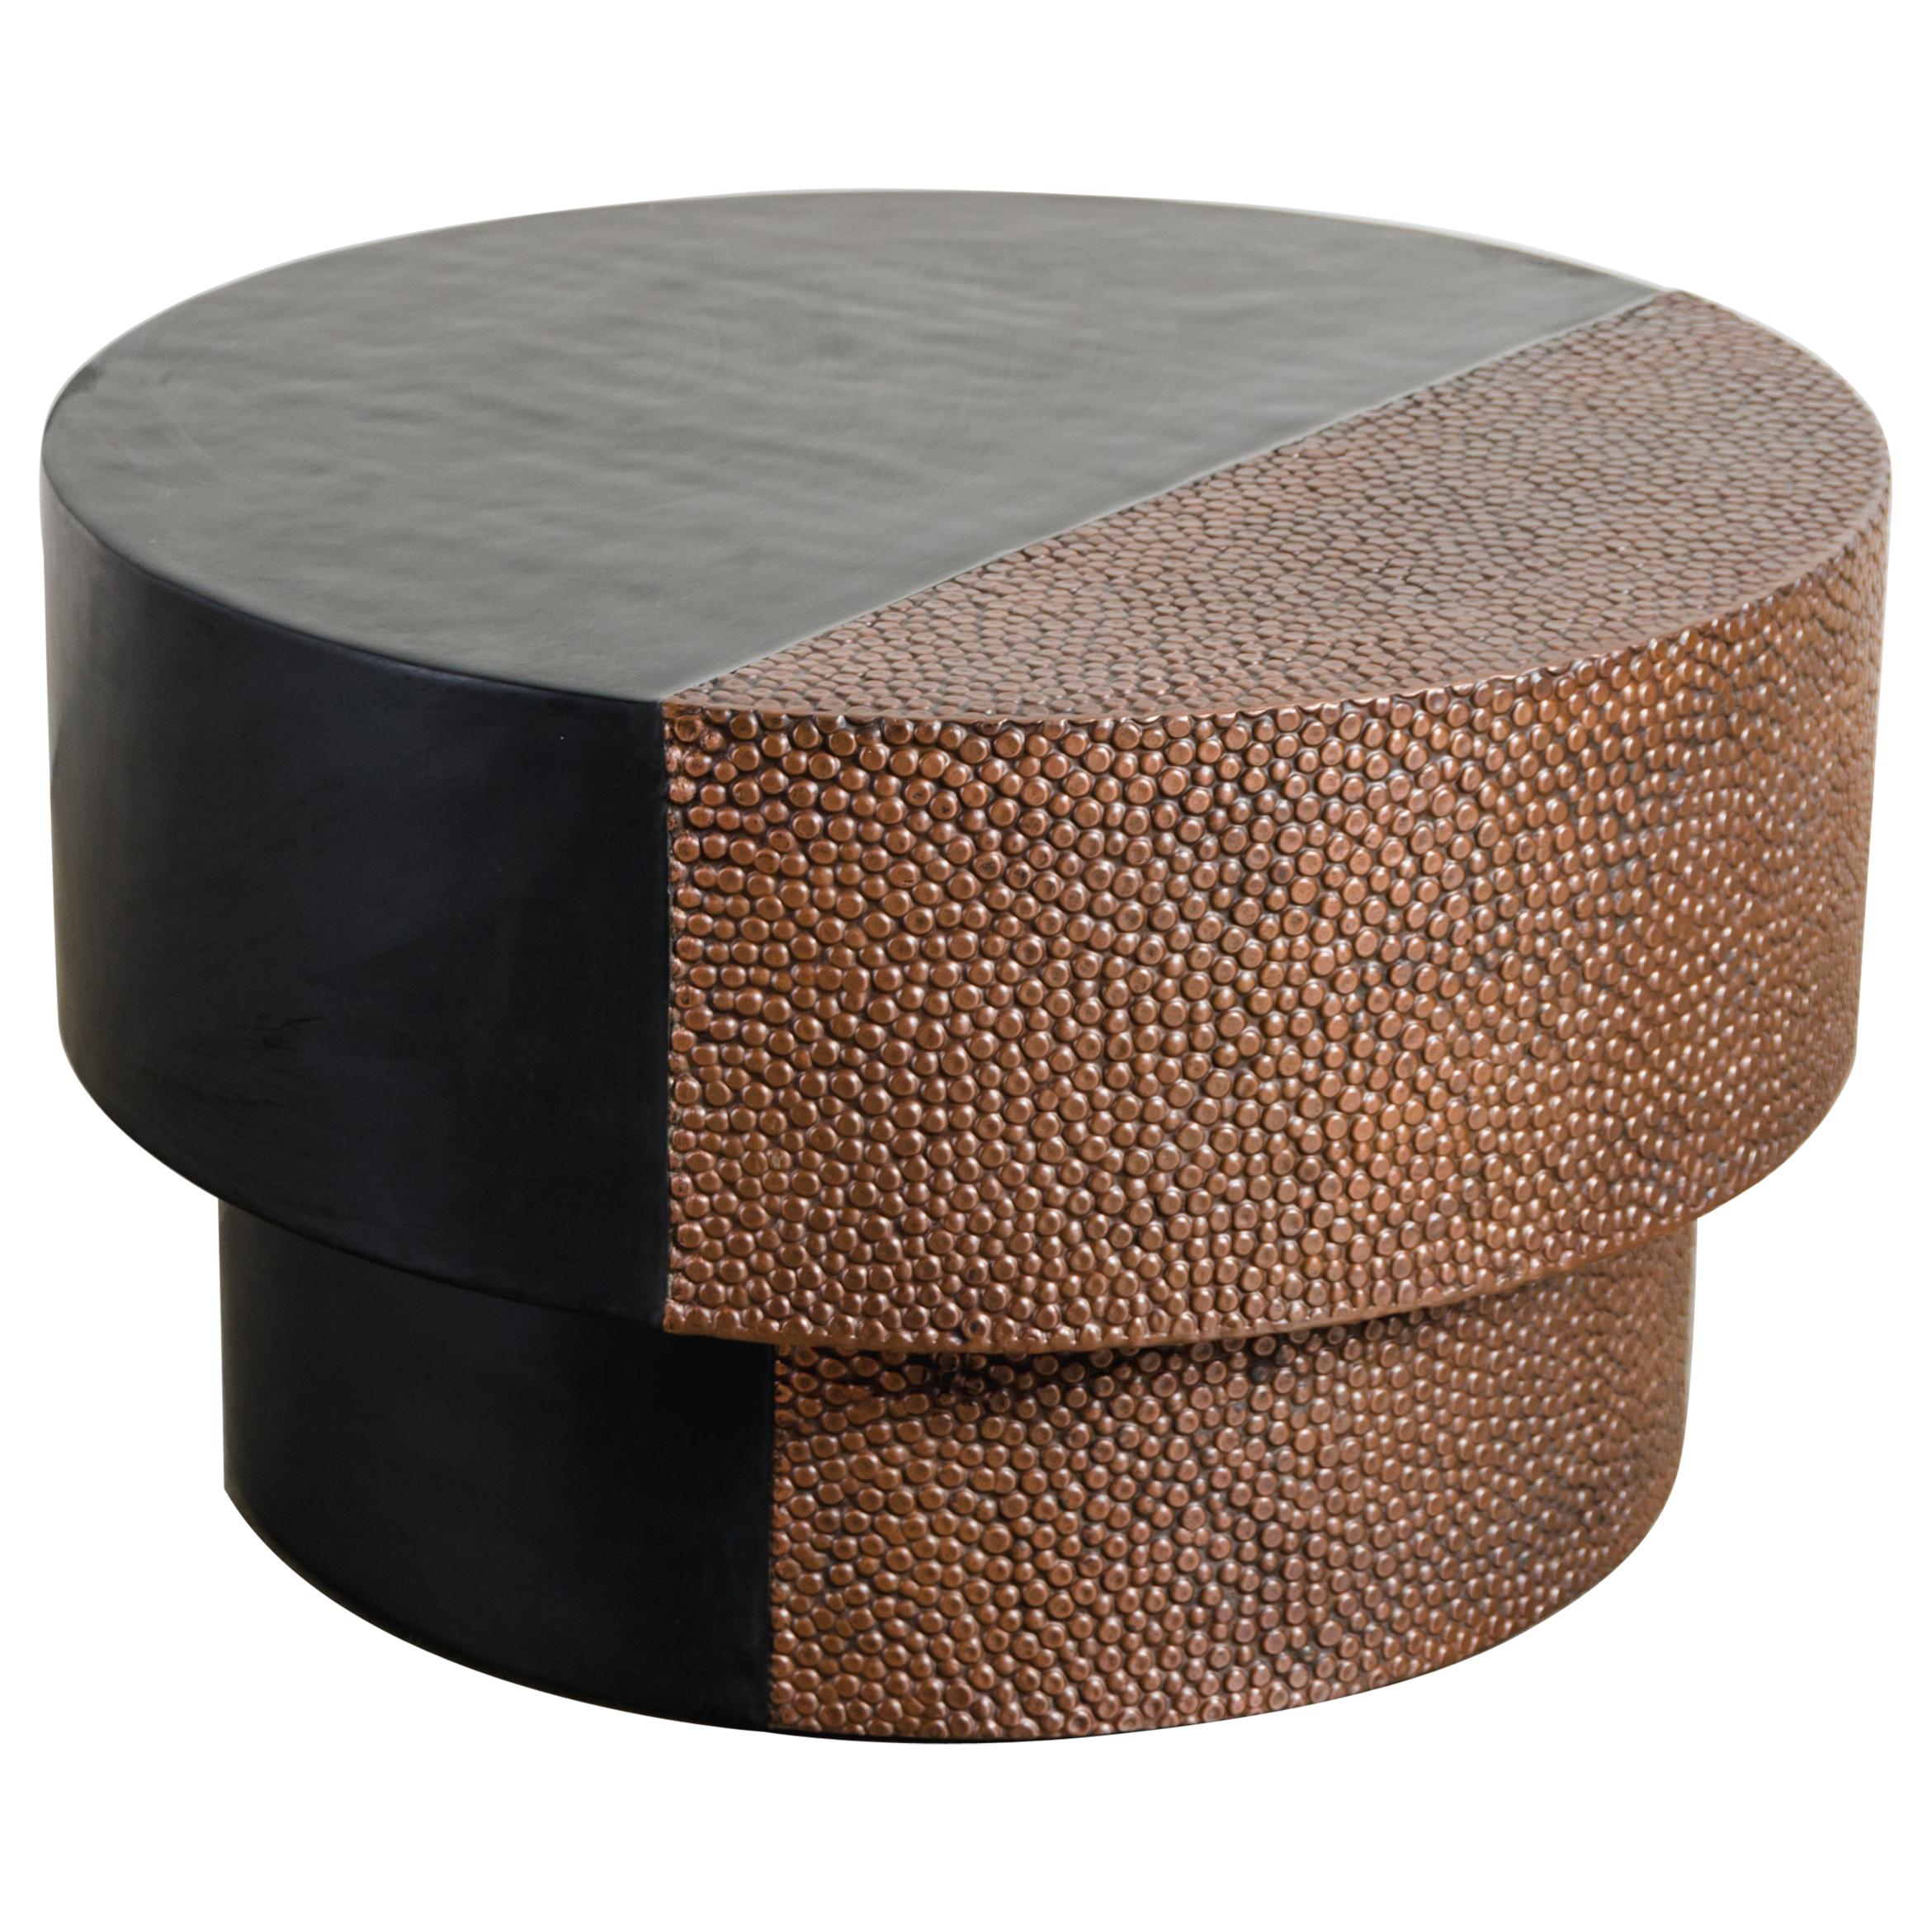 Drum Table with Toad Skin Design, Copper and Black Lacquer by Robert Kuo